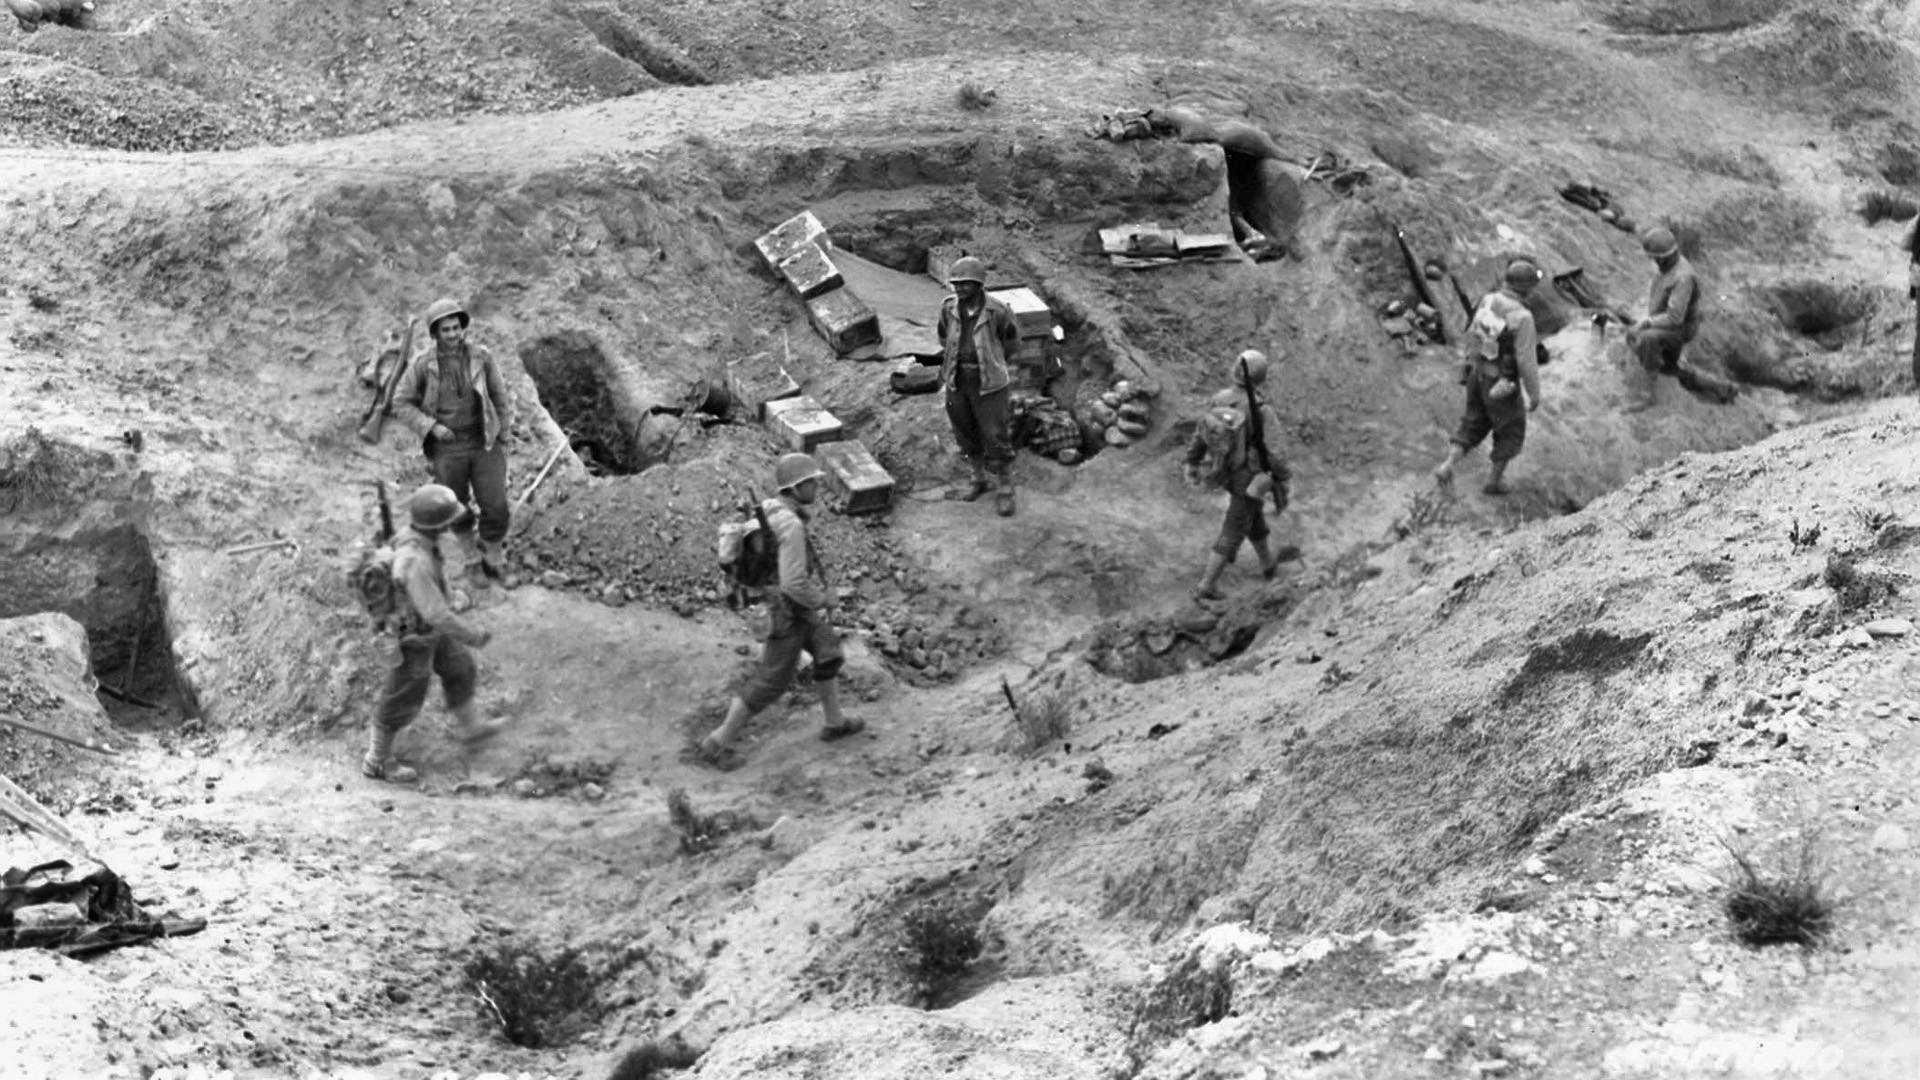 Soldiers of the U.S. 1st Infantry Division dig in near El Guettar, where they went into action against the German 10th Panzer Division and won. The 1st Division was a crack combat unit, molded under the leadership of Generals Allen and Roosevelt.